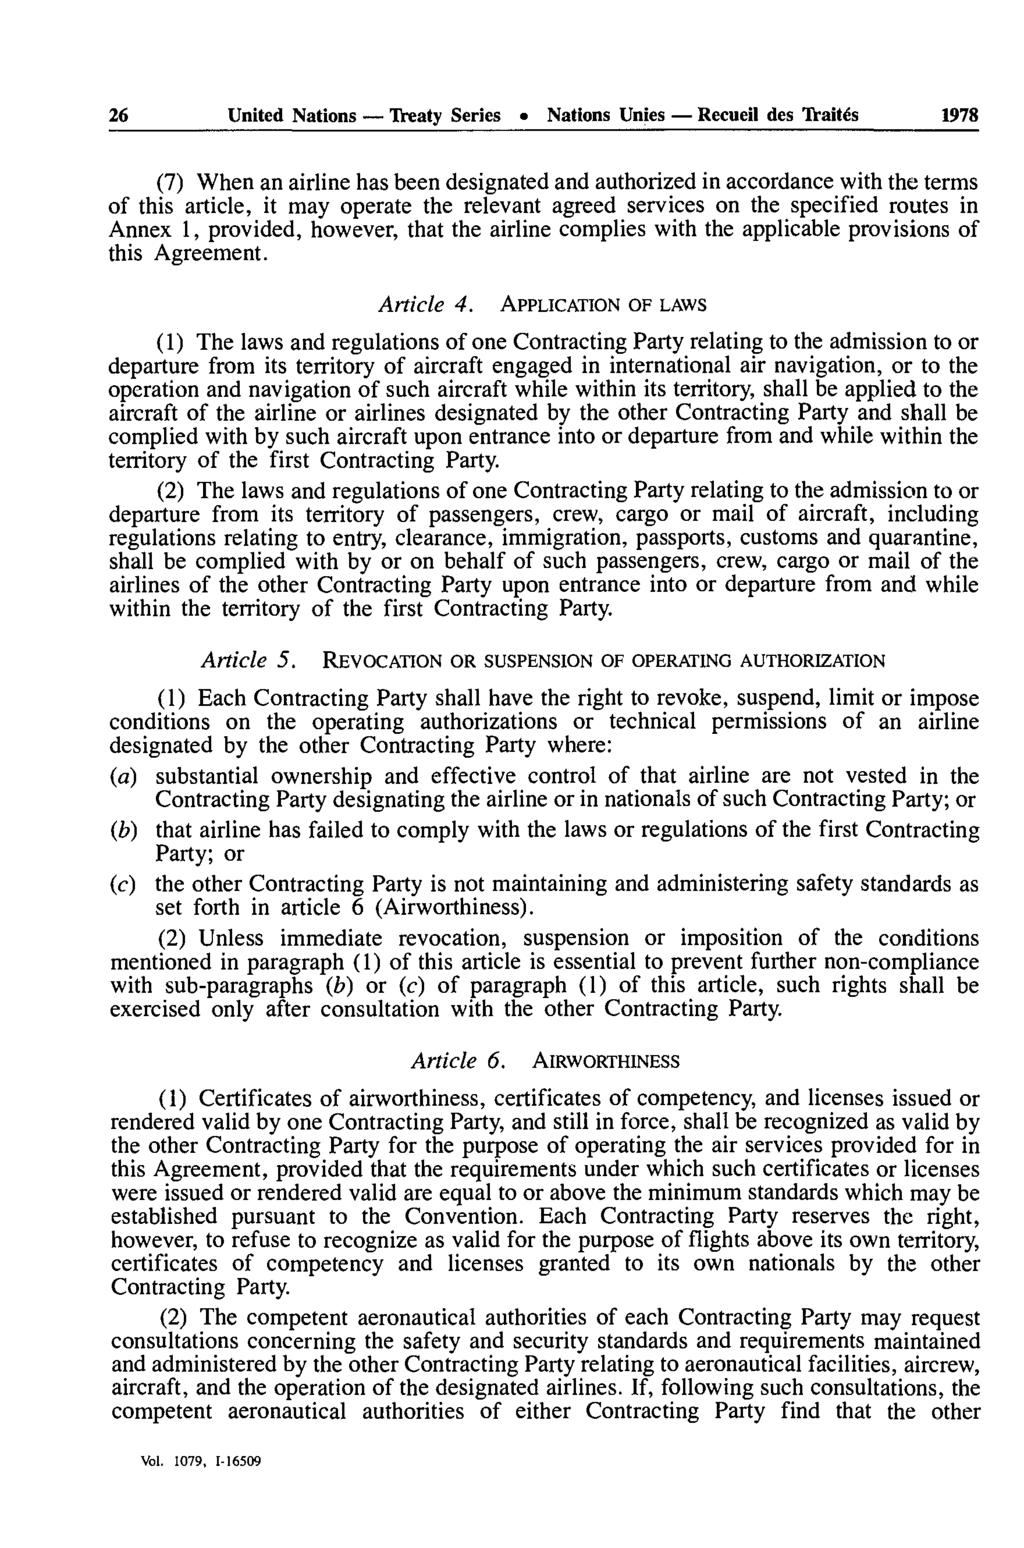 26 United Nations Treaty Series Nations Unies Recueil des Trait s 1978 (7) When an airline has been designated and authorized in accordance with the terms of this article, it may operate the relevant